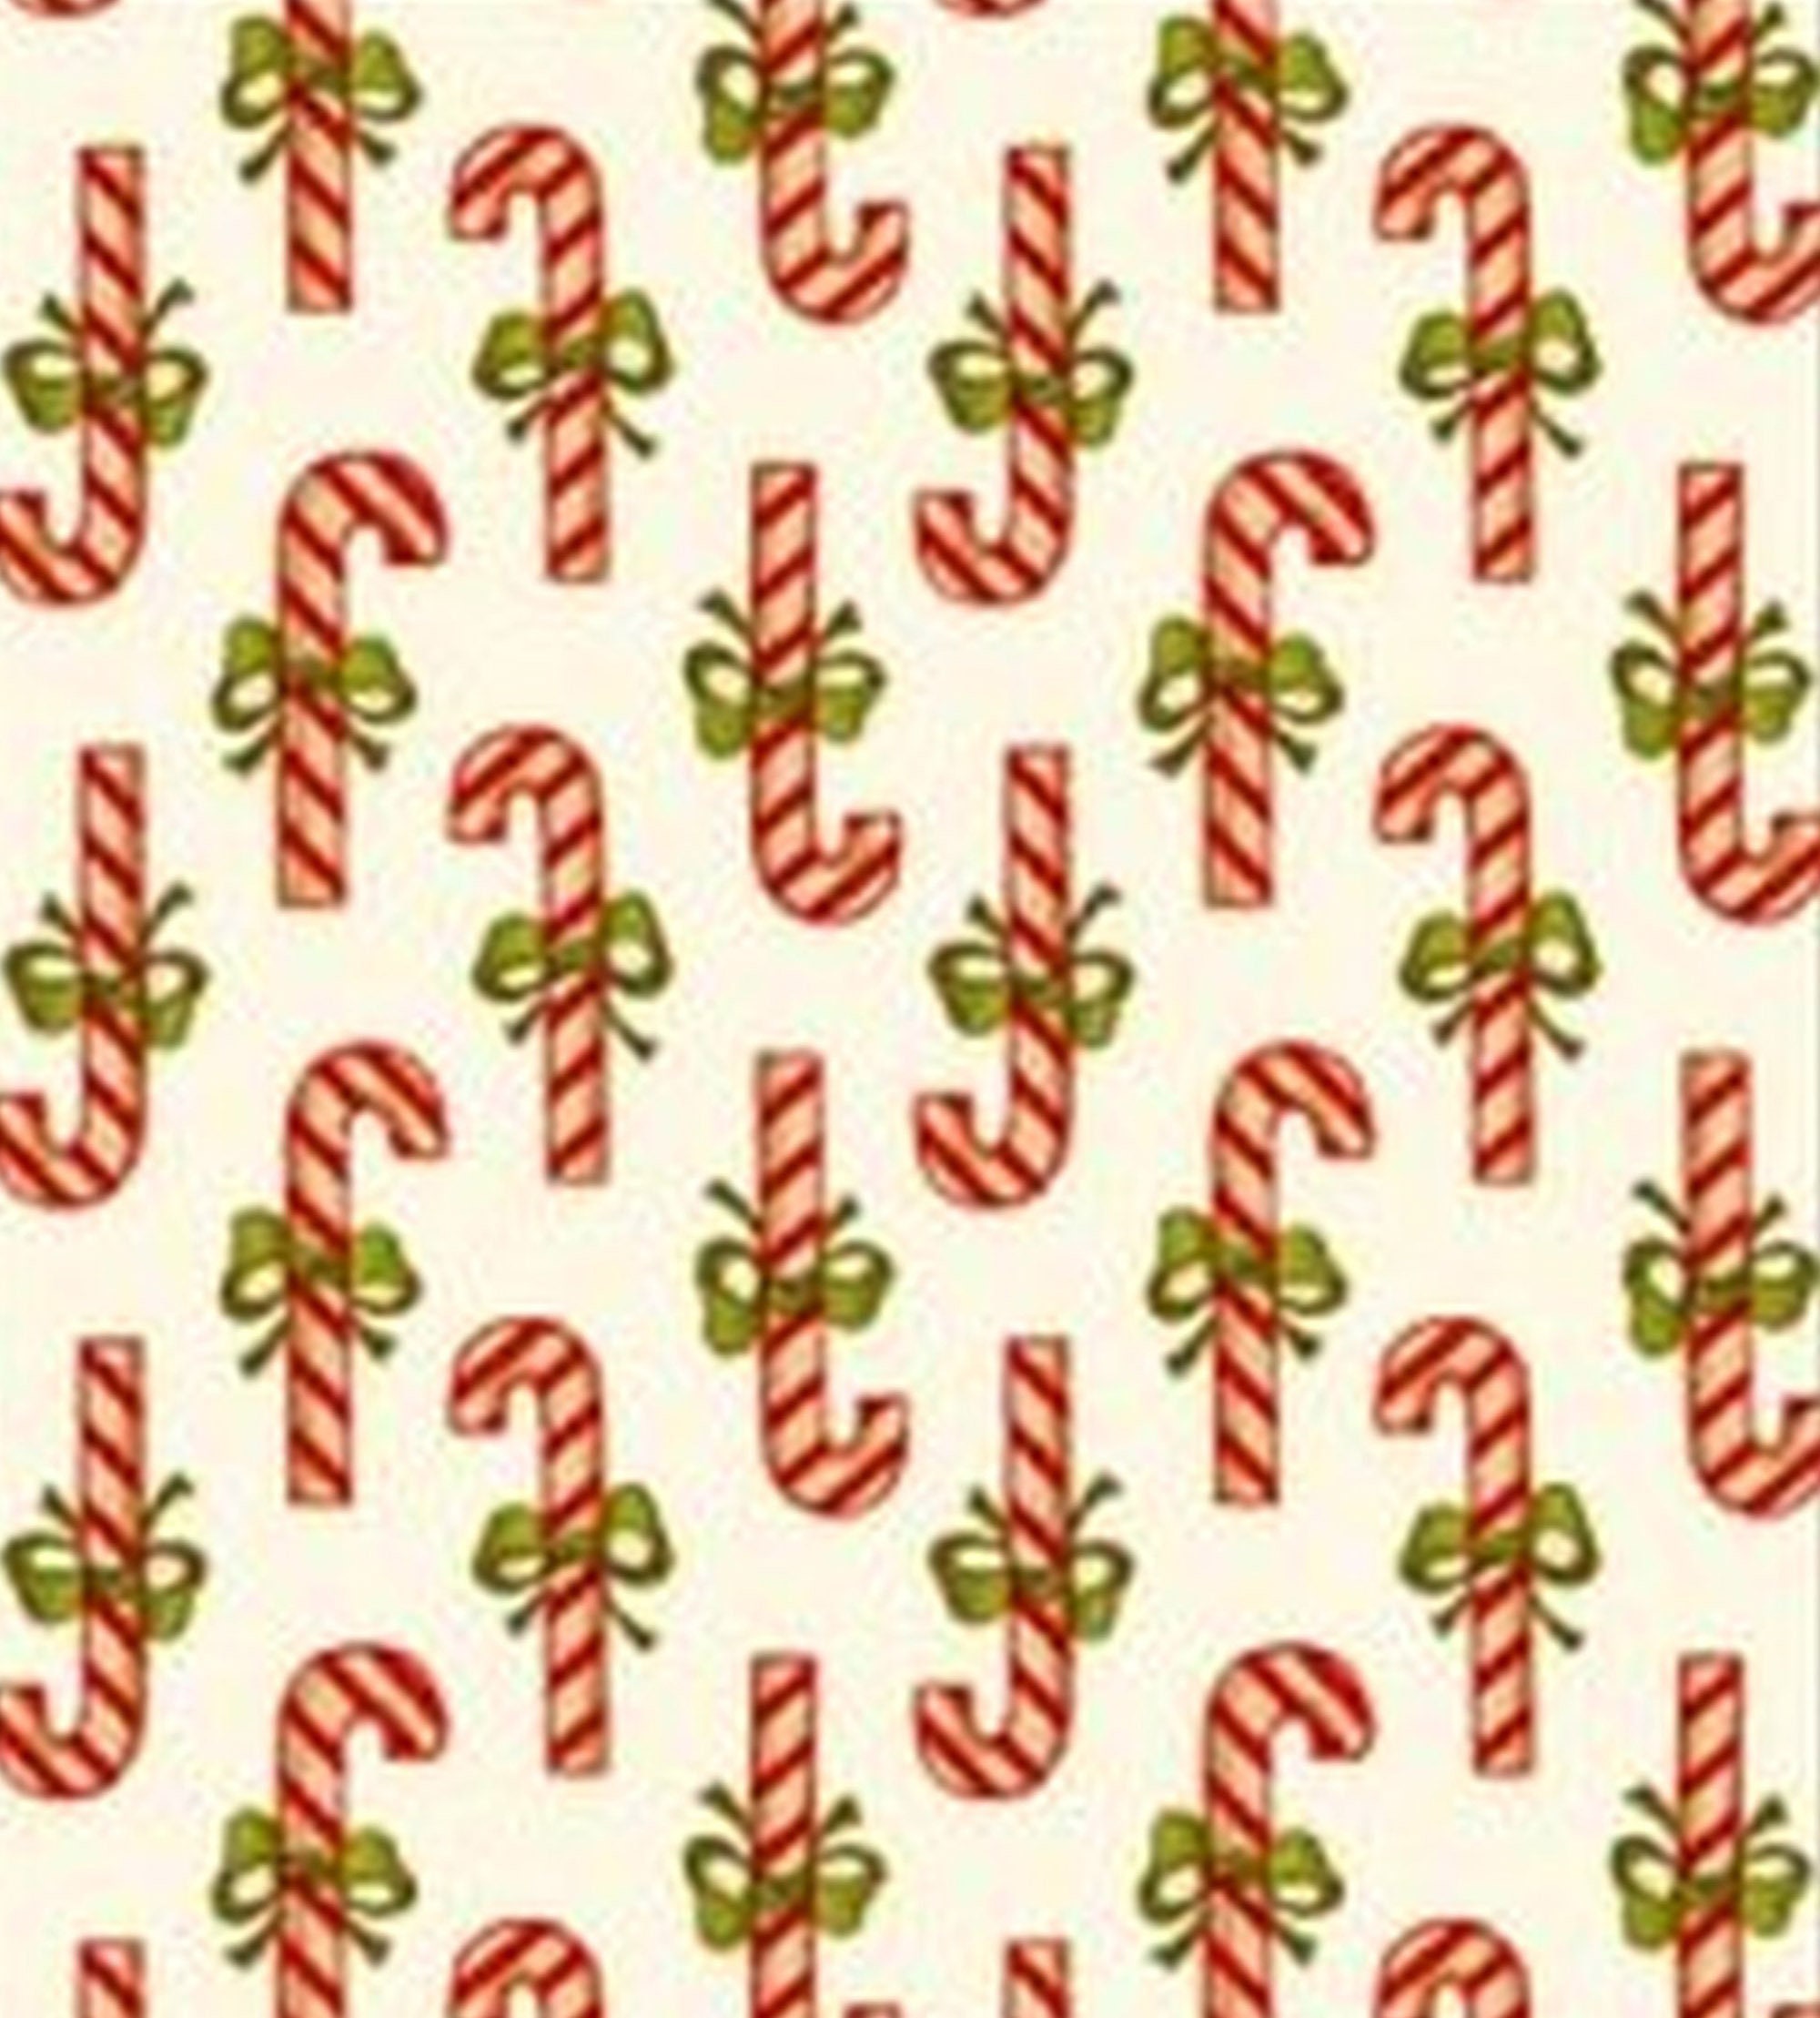 A seamless pattern of candy canes - Candy cane